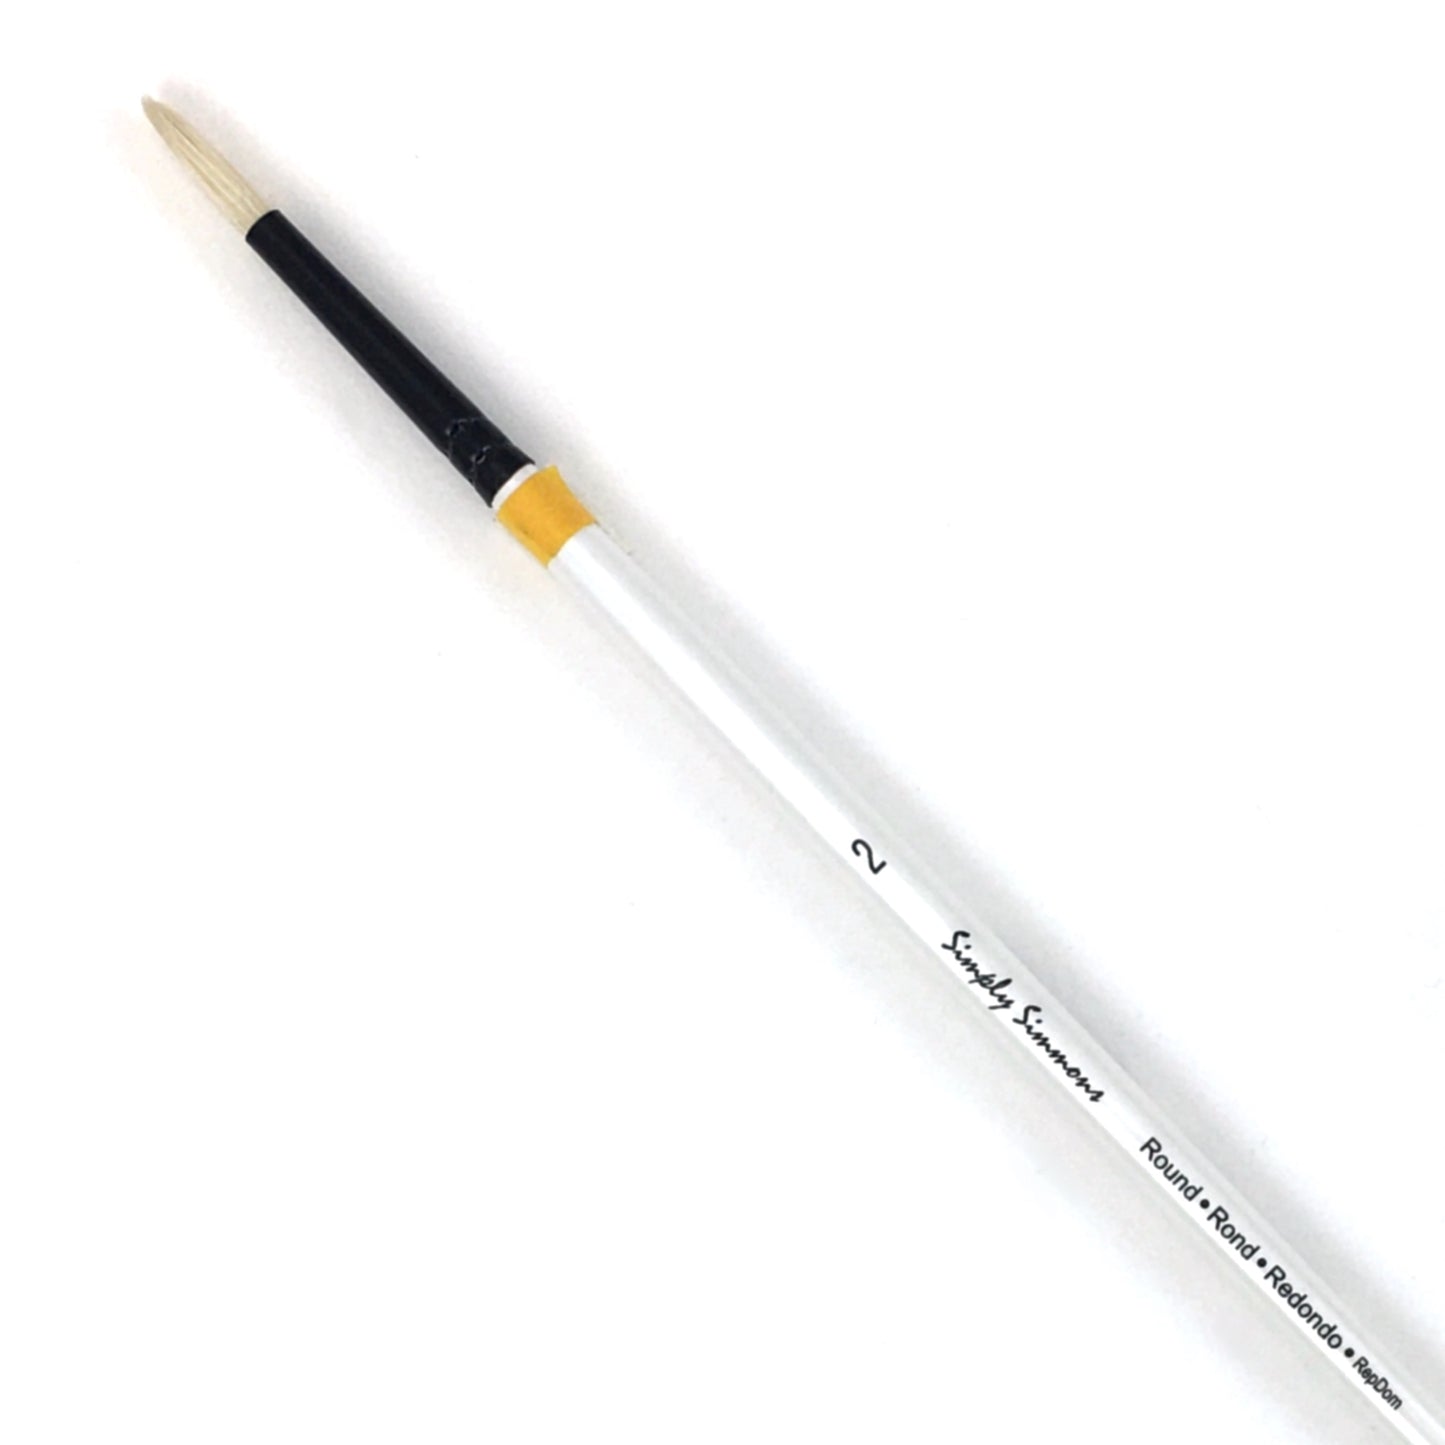 Simply Simmons All-Media Brush - Long Handle - Round (Bristle) / #2 by Robert Simmons - K. A. Artist Shop